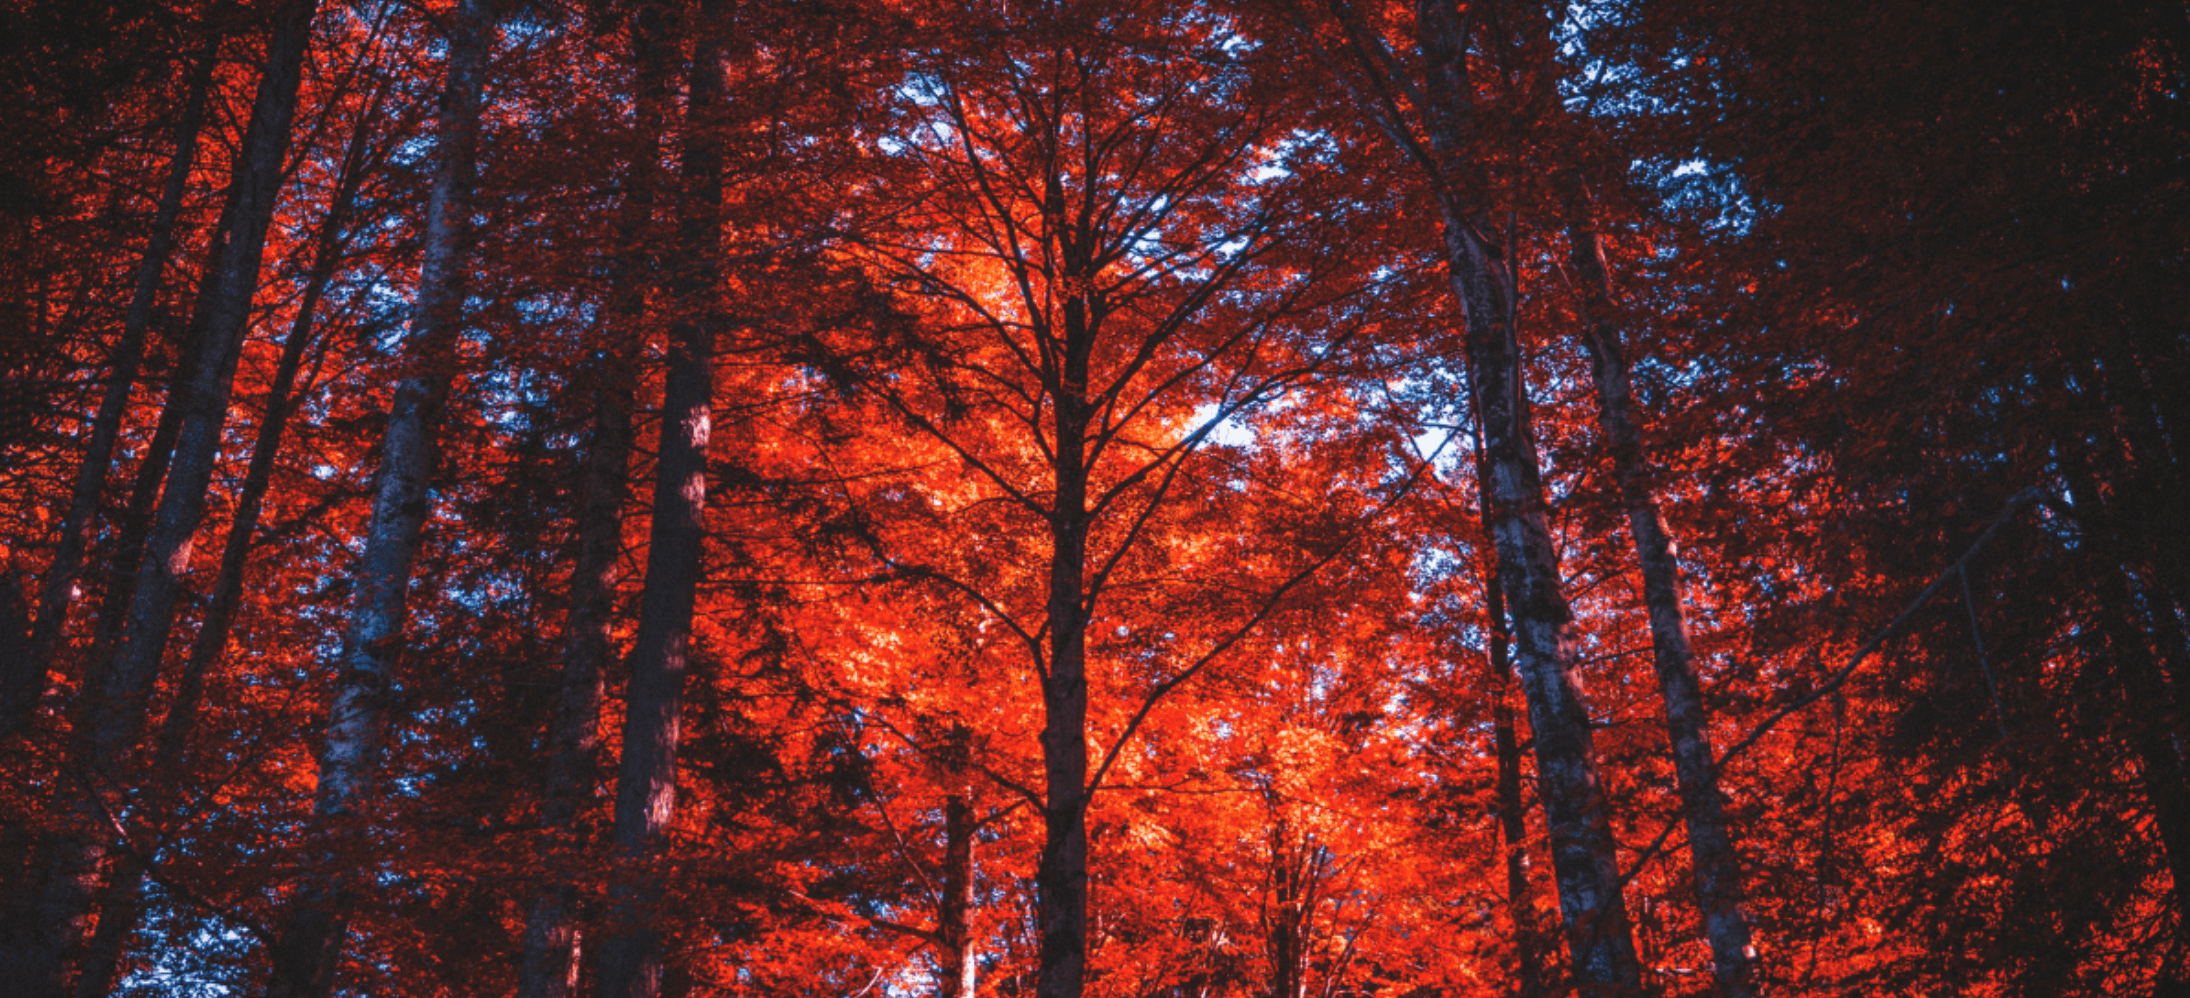 Red leafed trees with dark trunks